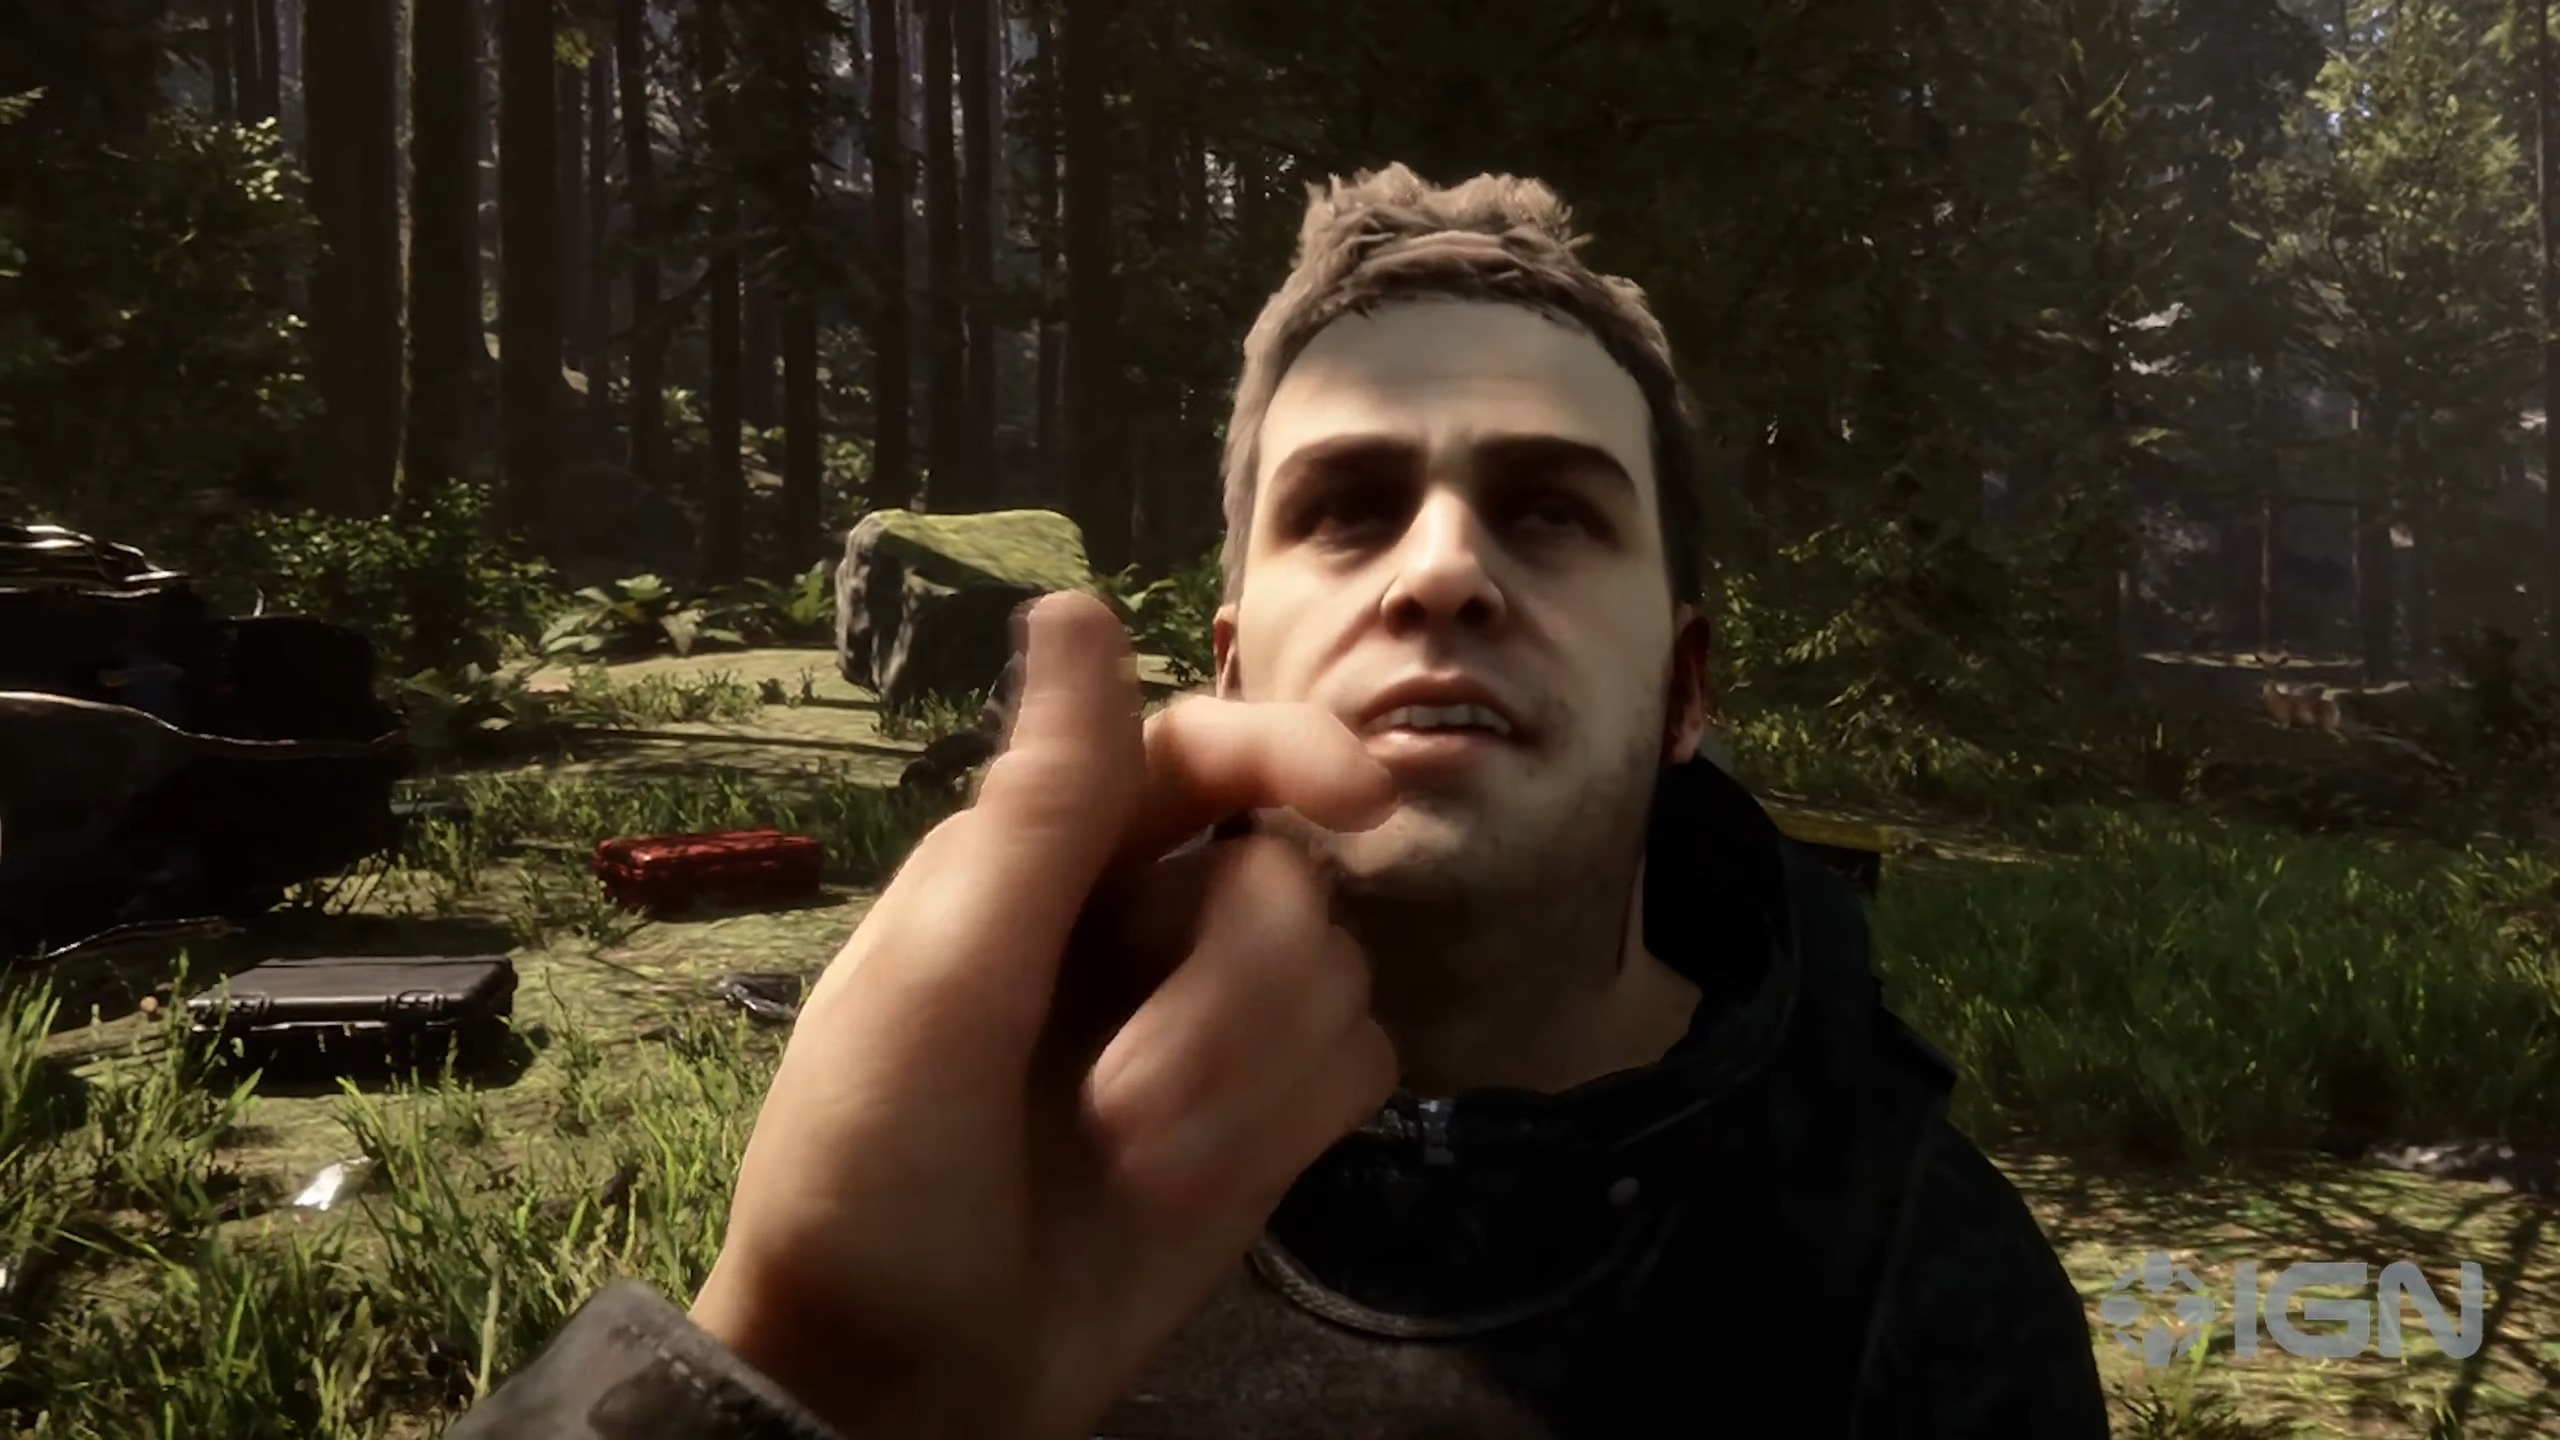 Sons of the Forest devs talk Kelvin and Virginia, GPS, and log sleds